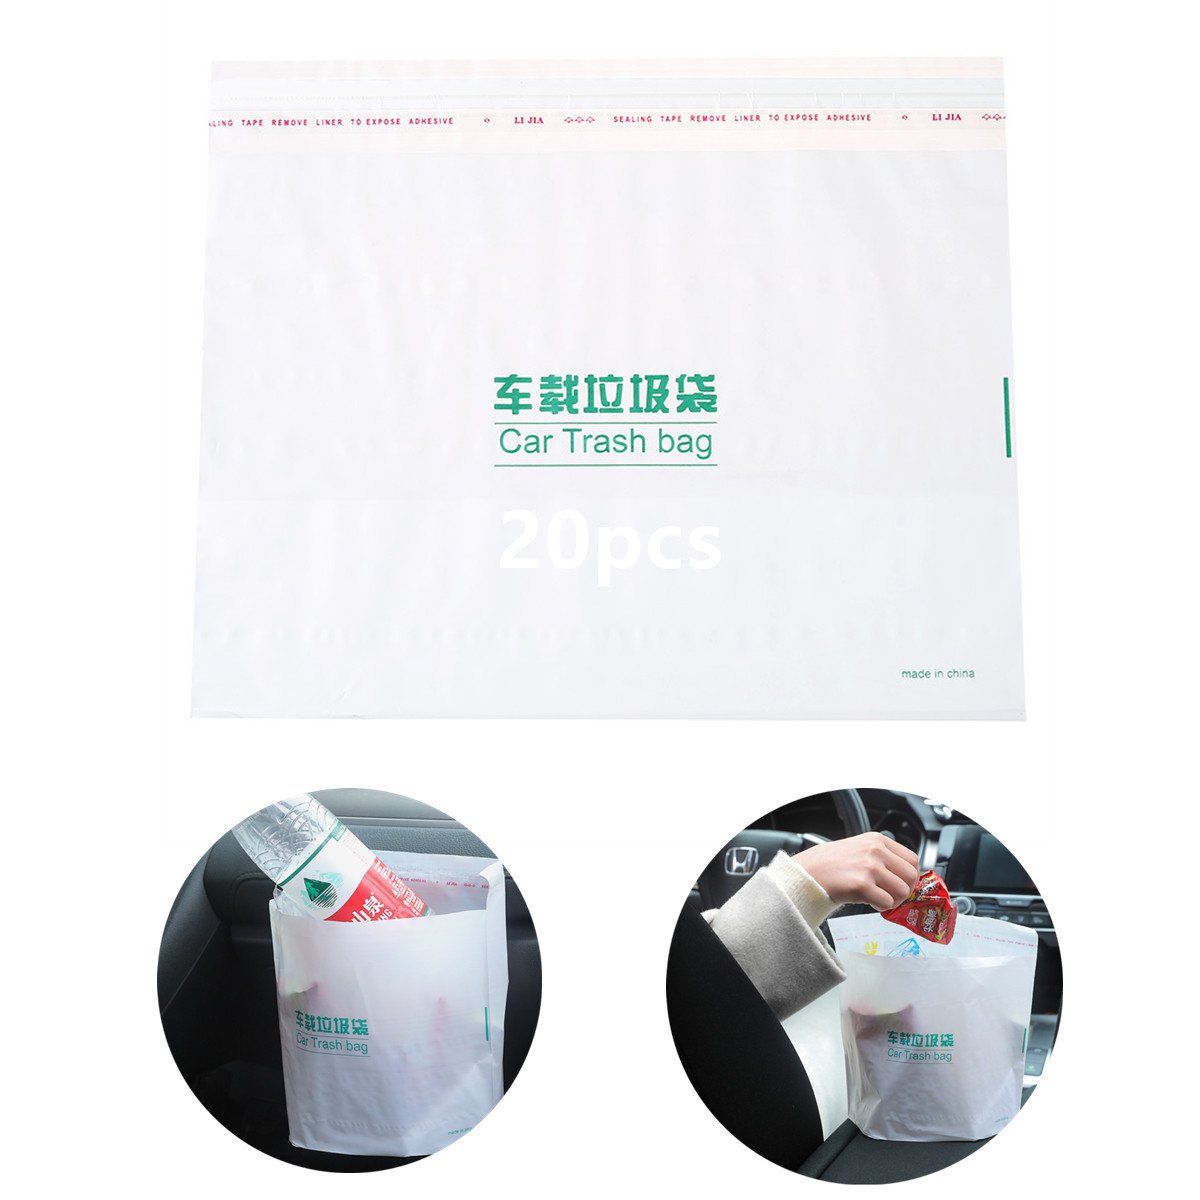 20PCS Easy Stick-On Disposable Car Trash Bag,Leakproof Vomit Bag, Auto Trash Bag Auto Trash Bag,Durable,Large Capacity Portable,Suitable for Car,Travel